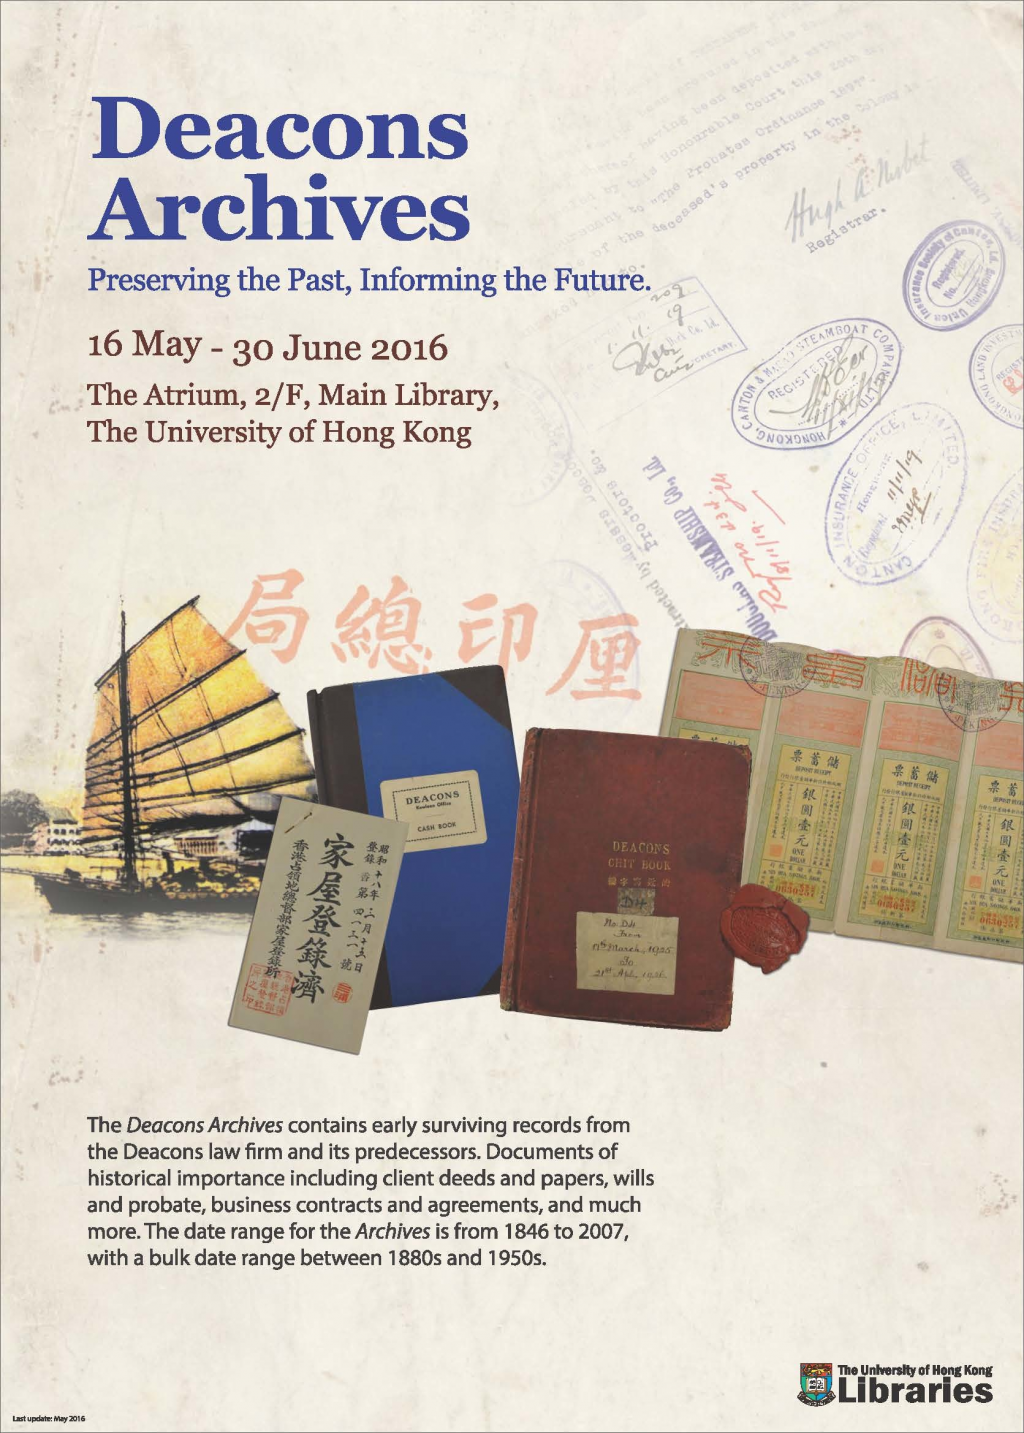 Preserving the Past, Informing the Future, Exhibition of the 